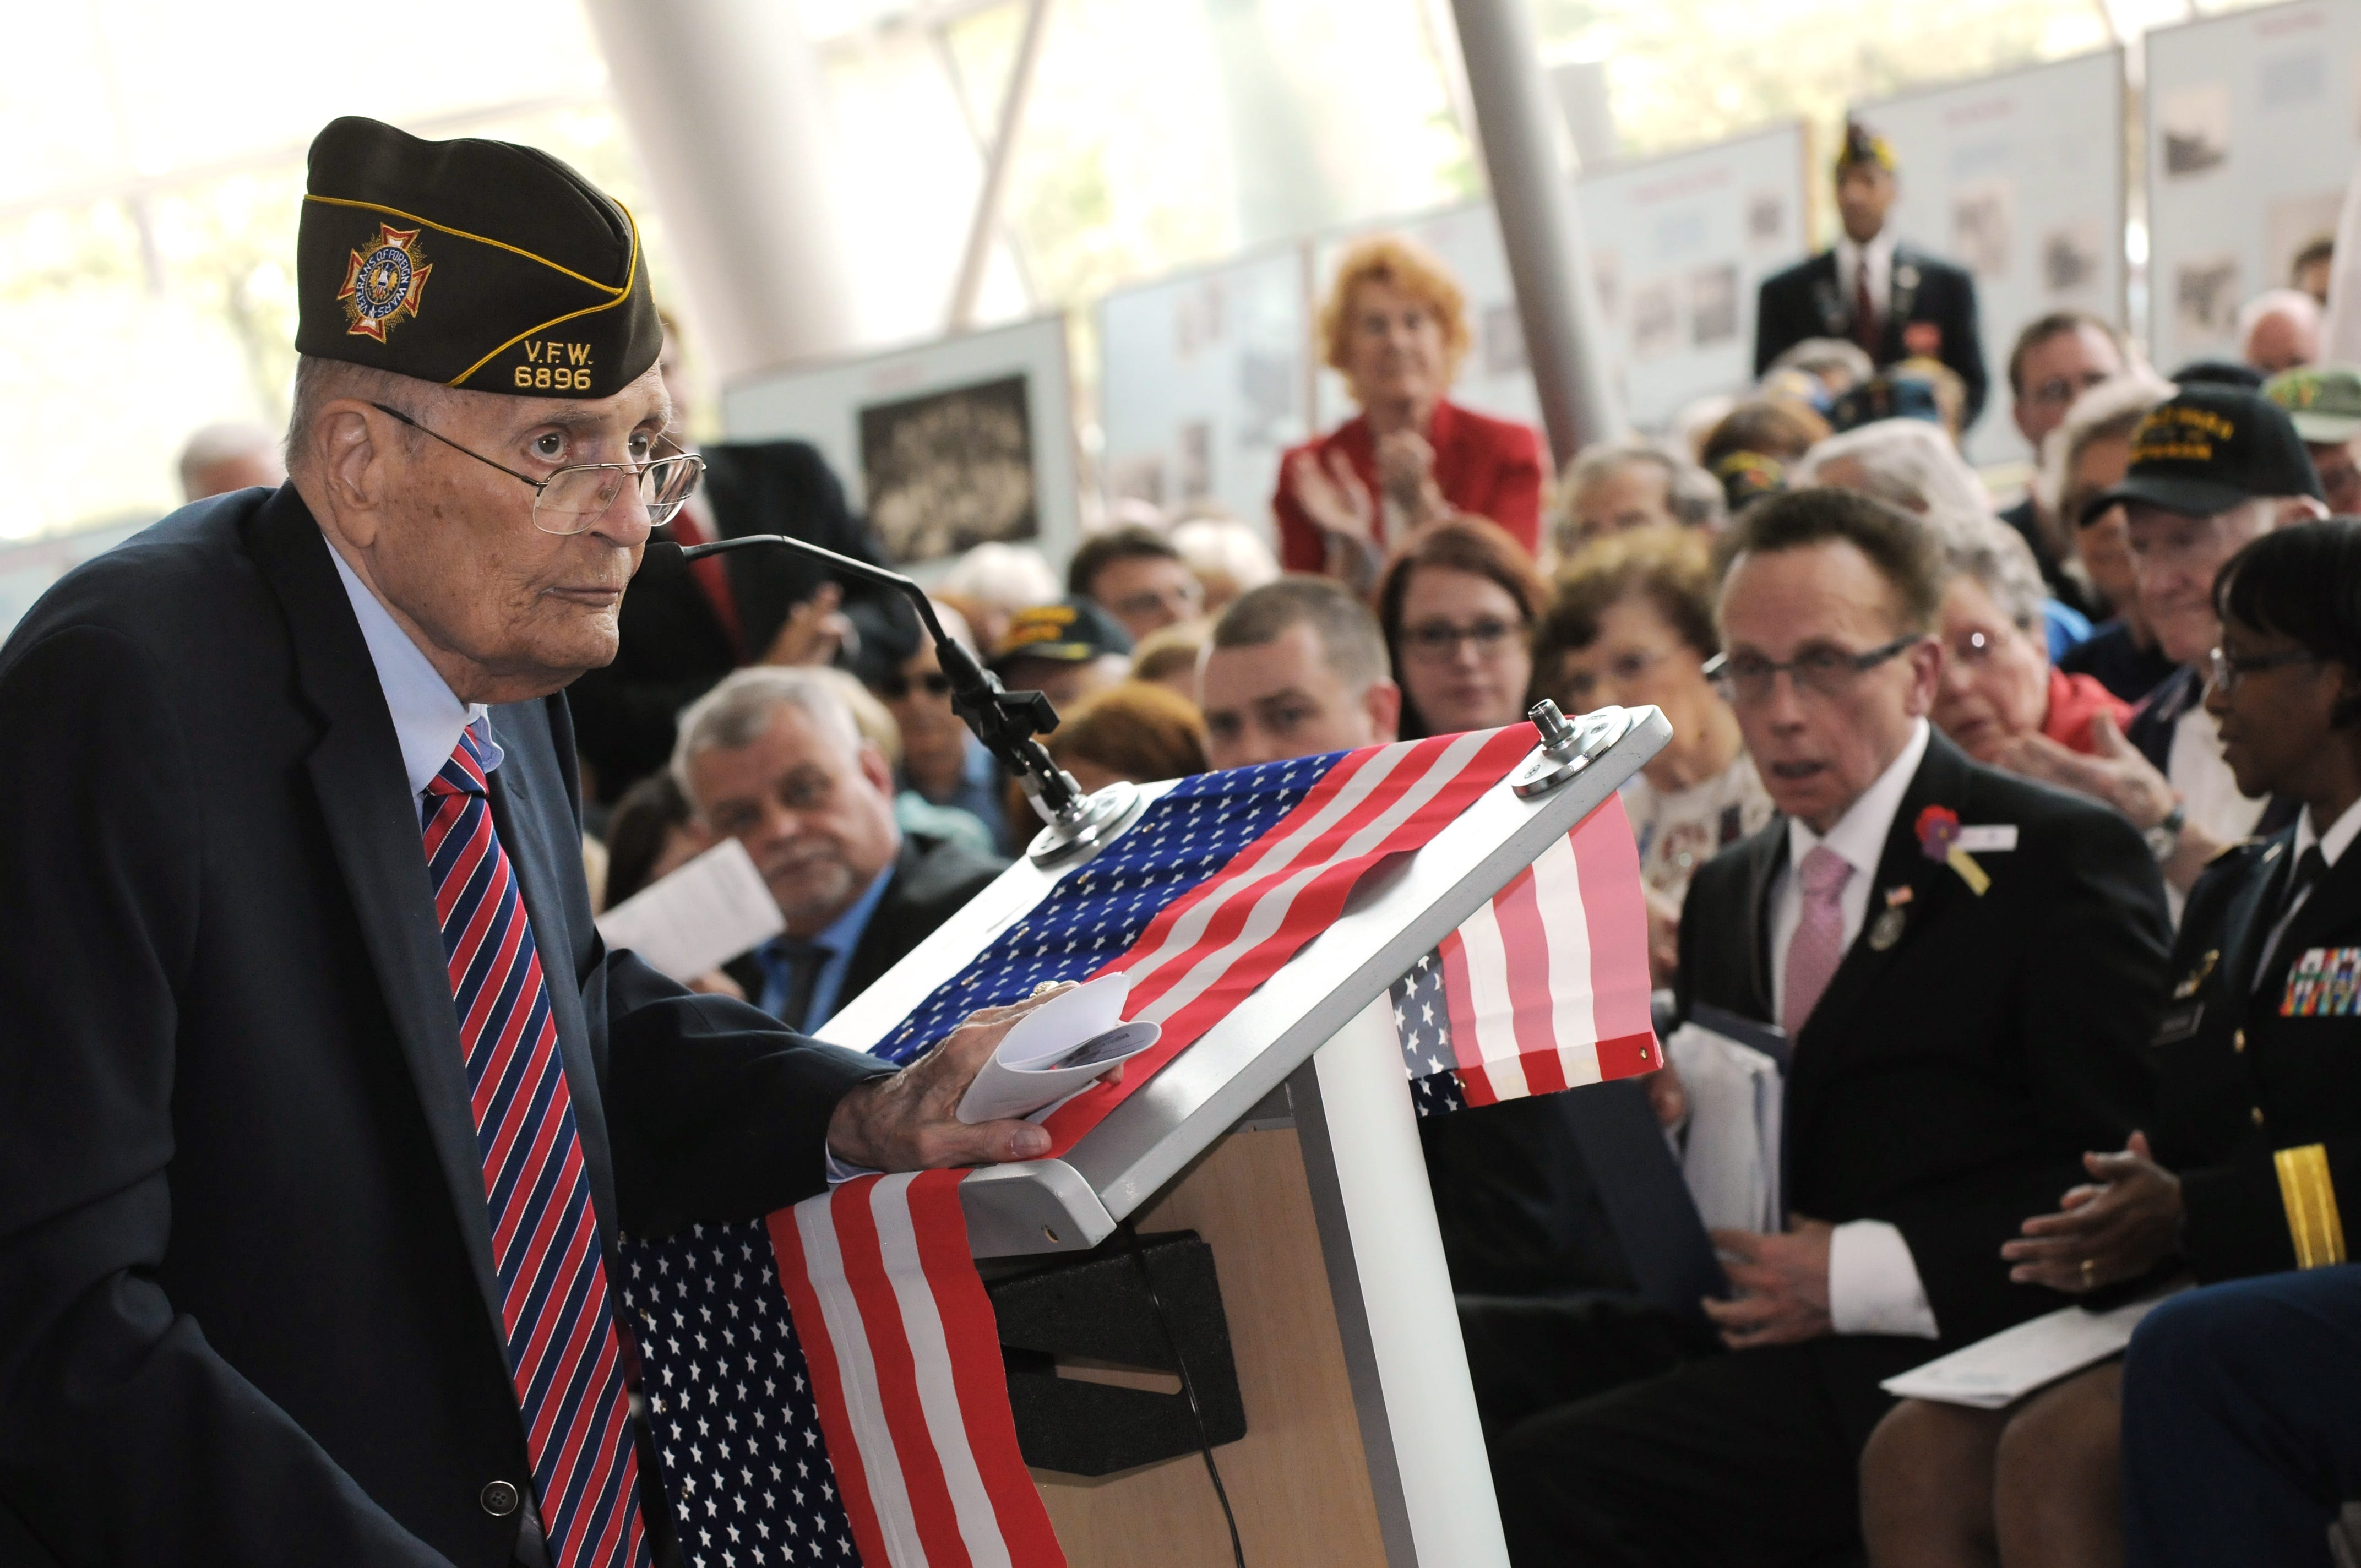 Retired U.S. Rep. John Dingell speaks at  the City of Warren's celebration of the 70th anniversary of the end of WWII at Warren City Hall, May 8, 2015.